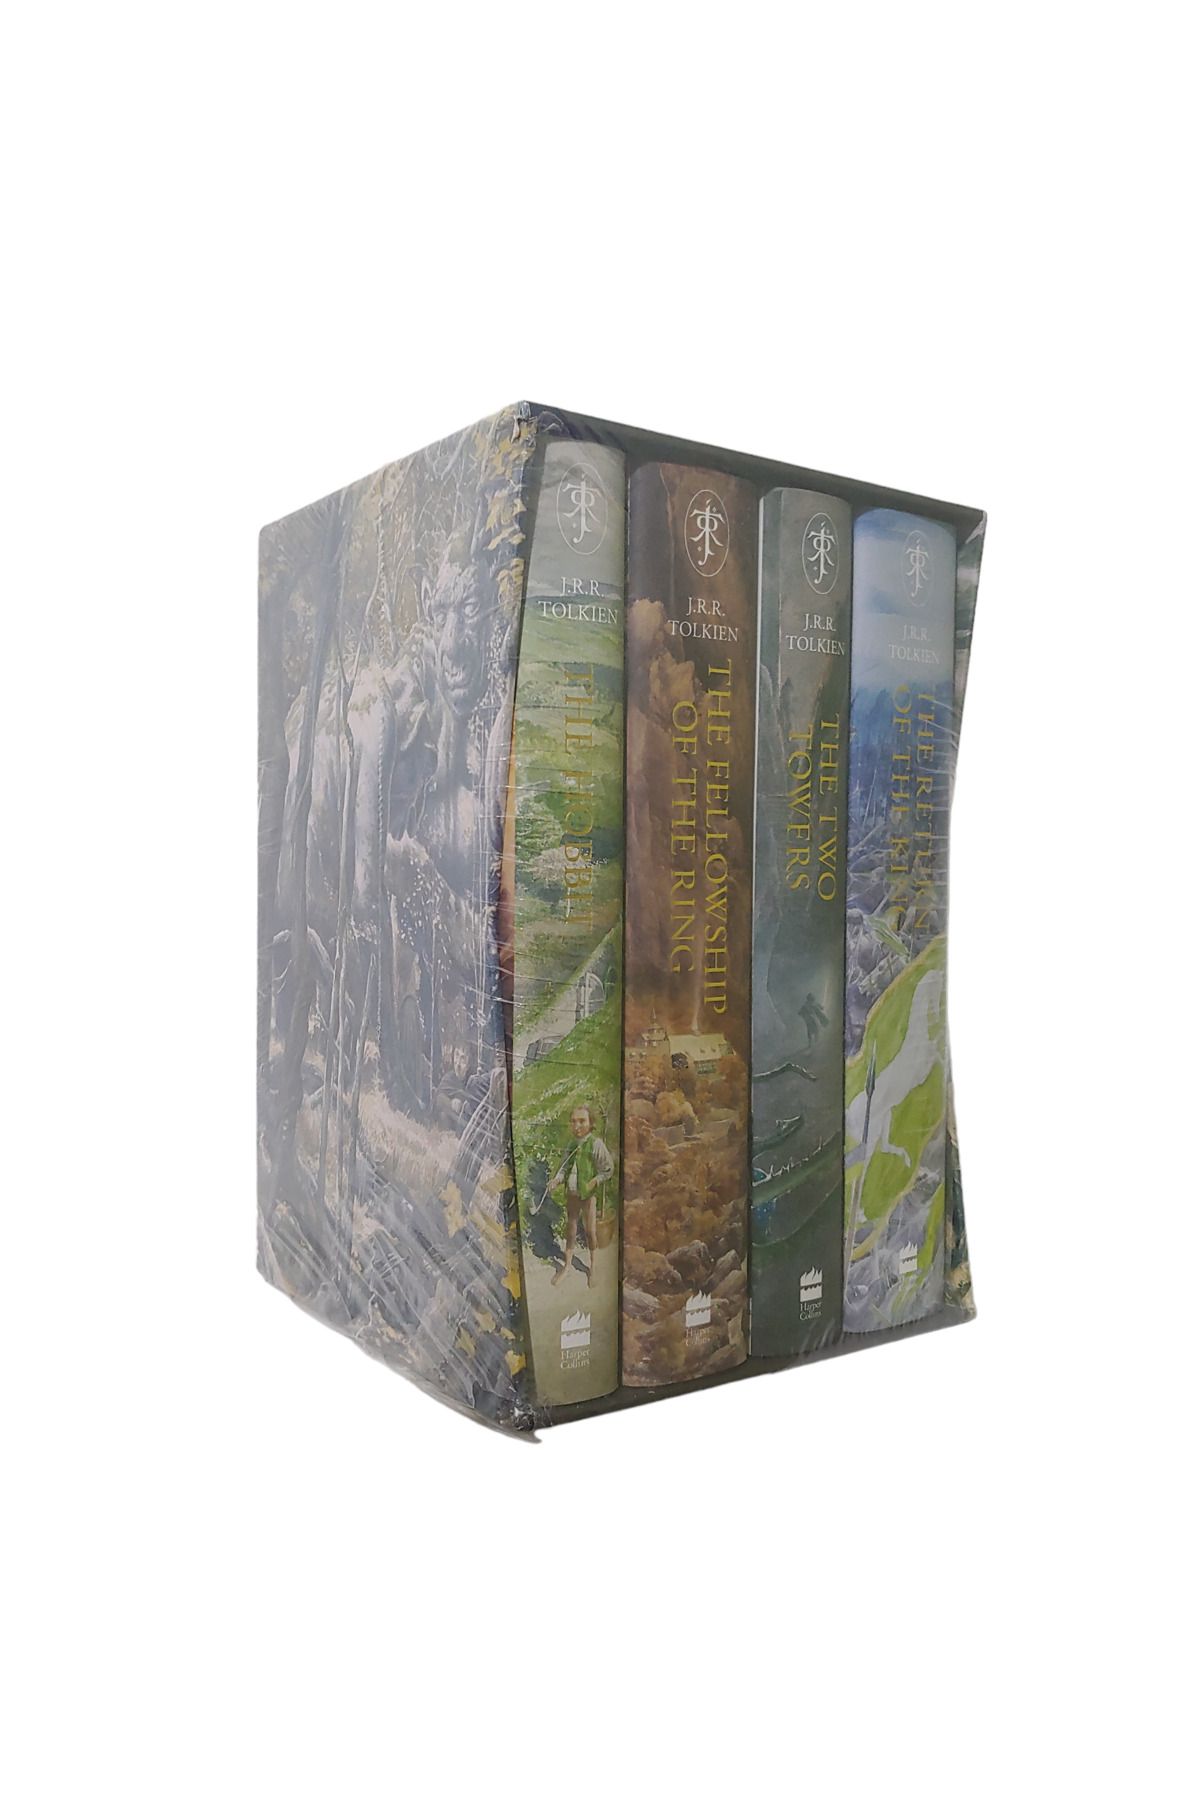 Harper Collins The Lord of The Rings and The Hobbit İllustrated Box Set